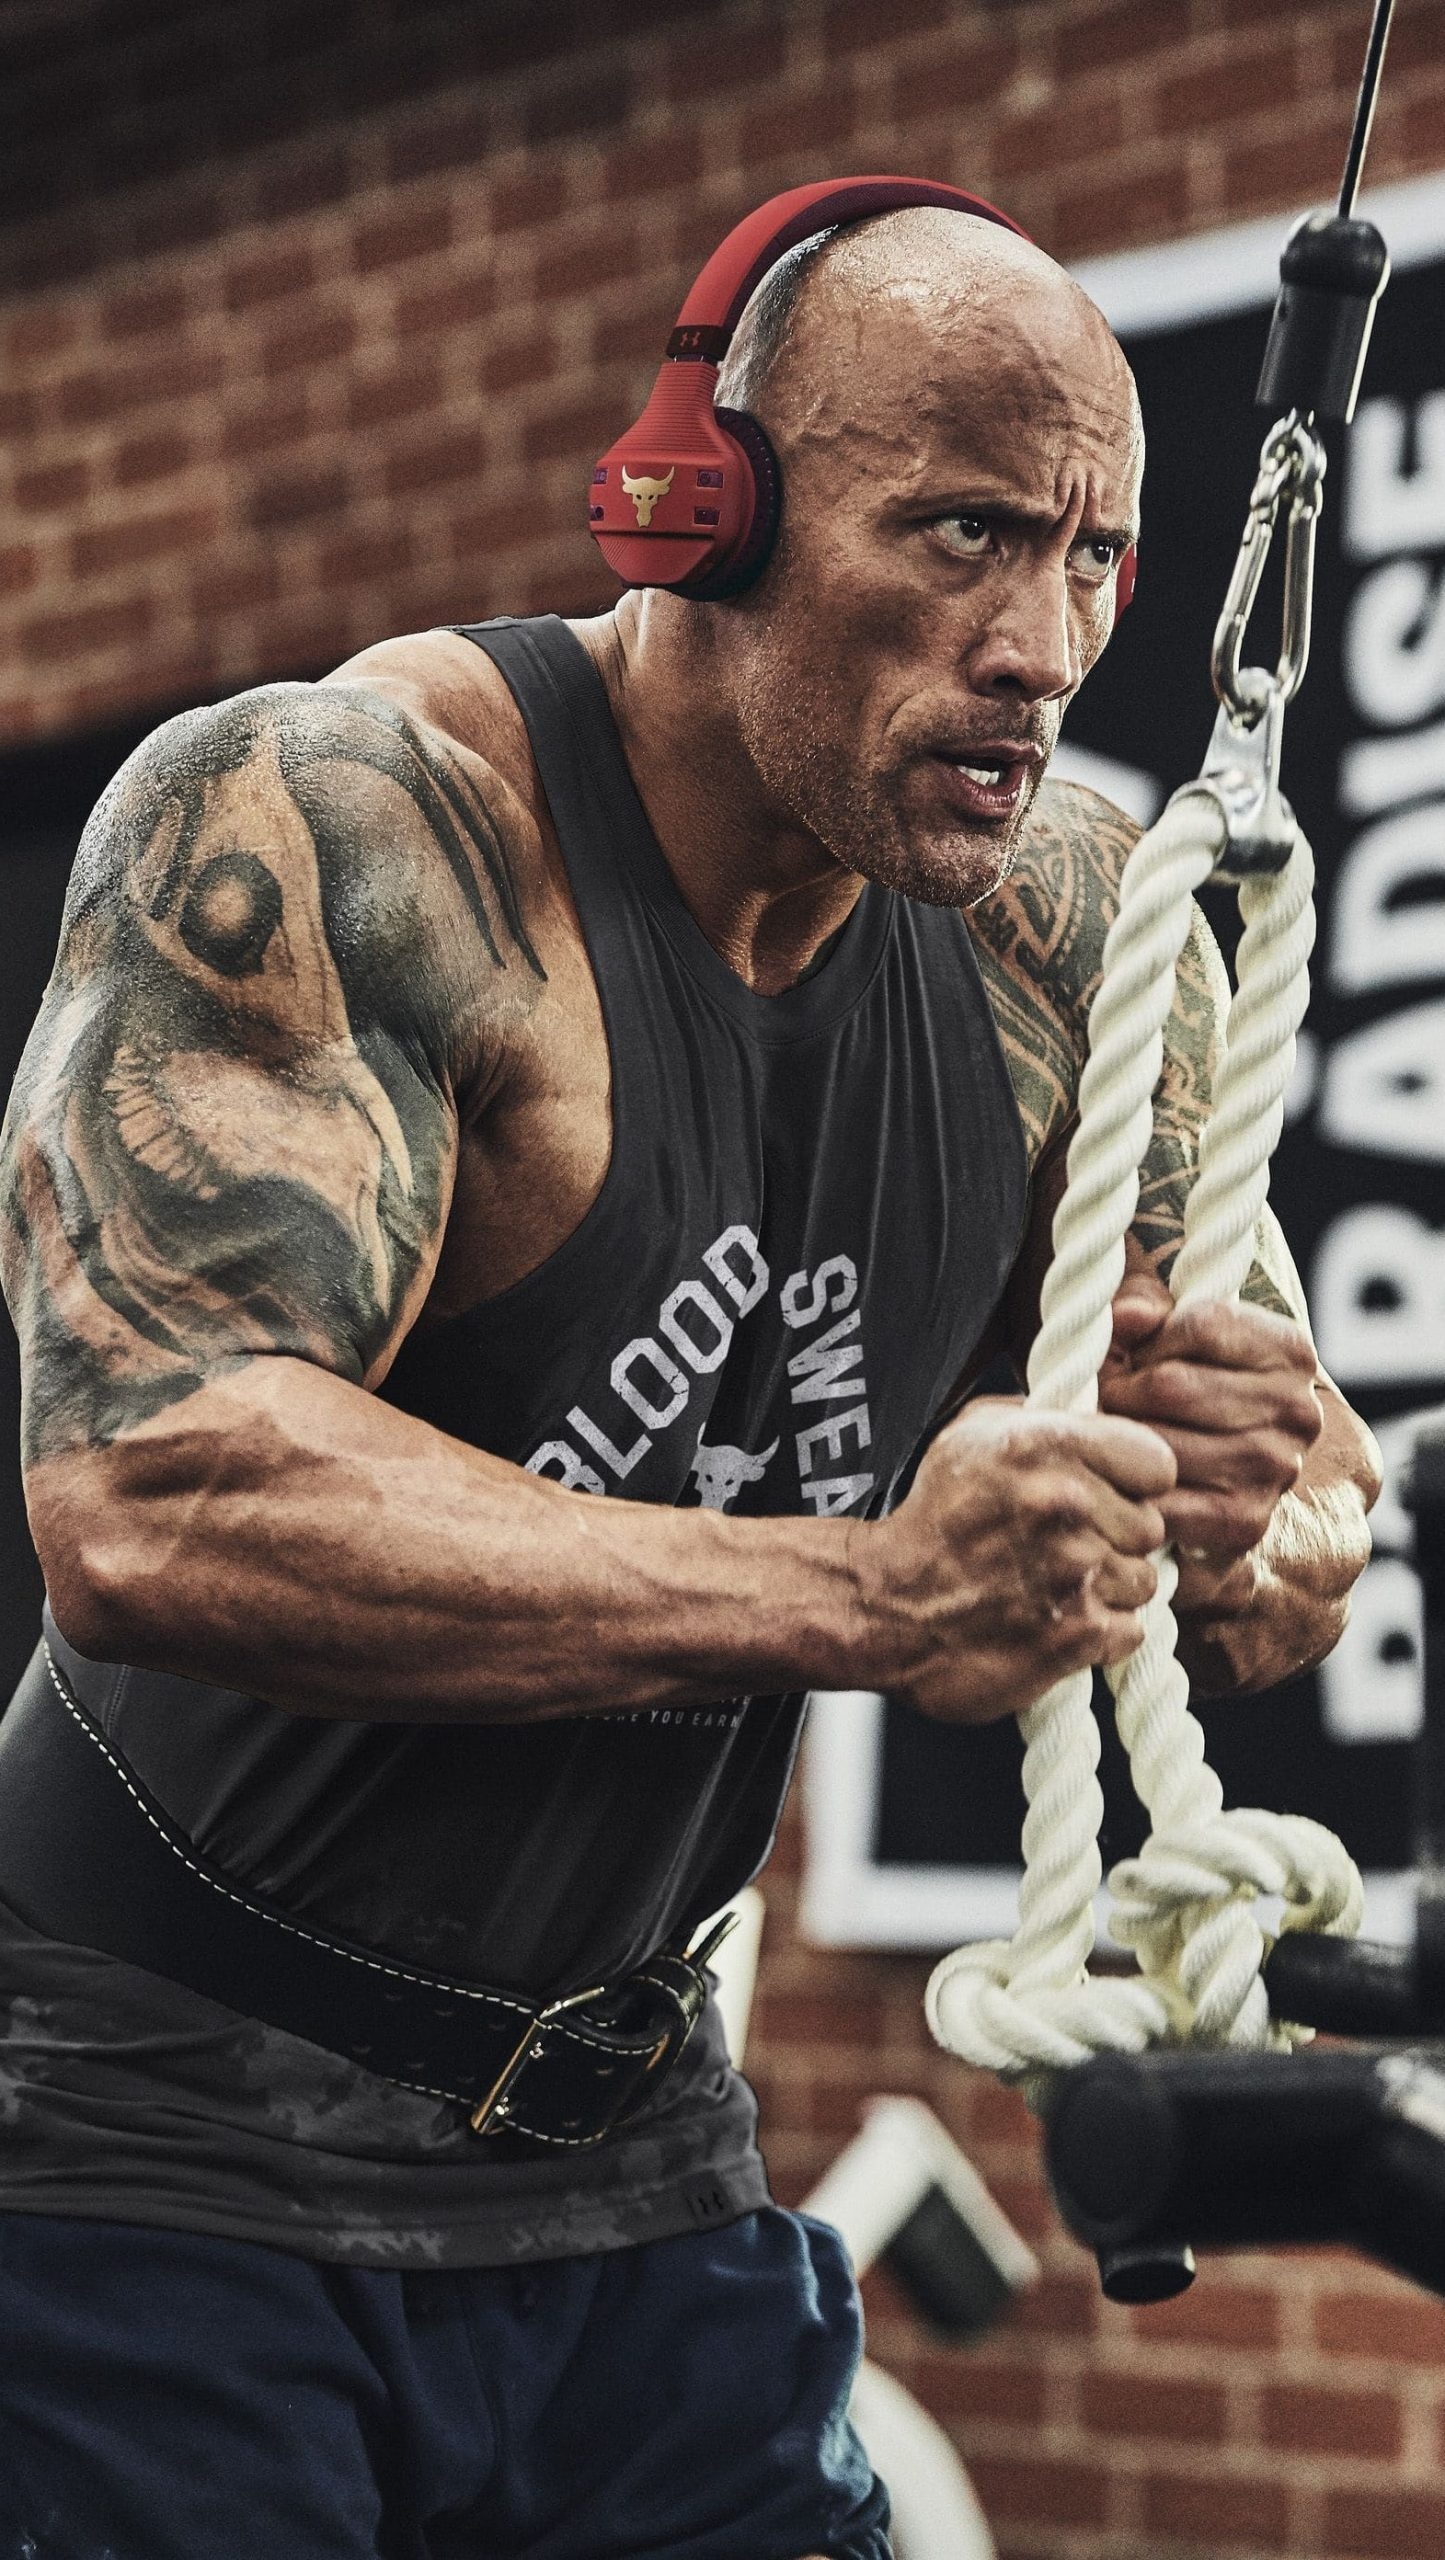 Gym motivation, The Rock wallpapers, Fitness inspiration, Exercise dedication, 1450x2560 HD Handy